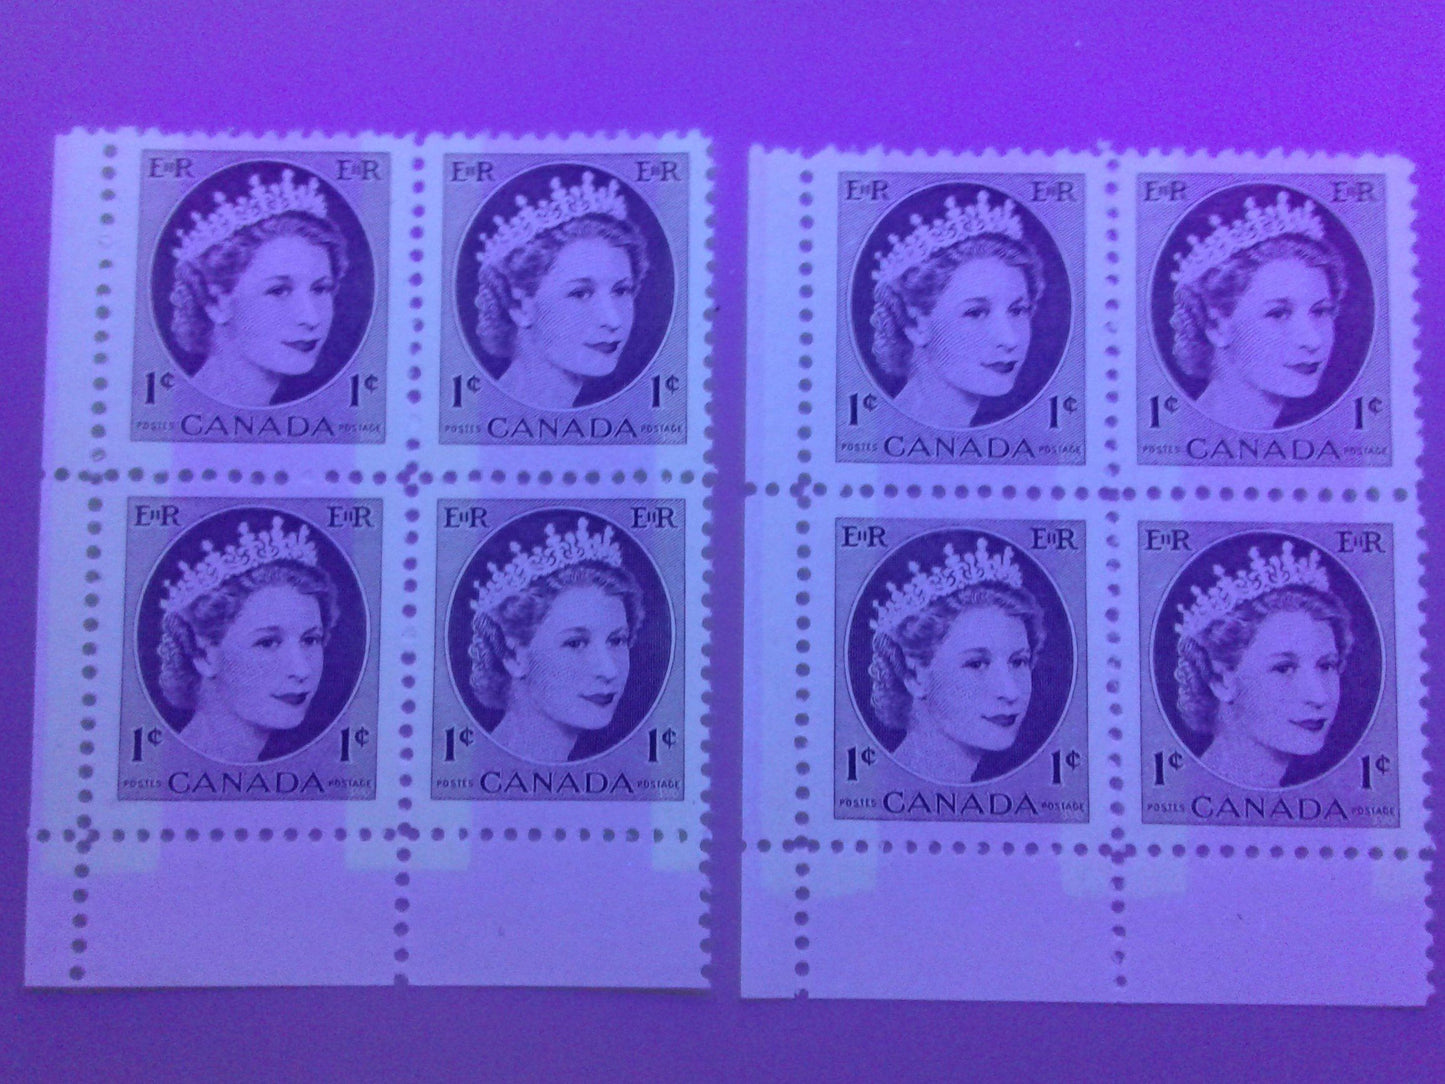 Canada #337p(var) 1c Chocolate Queen Elizabeth II, 1954-1962 Wilding Issue, Upper Right Blank Winnipeg Tagged Blocks of 4, Four Different, Various Perfs., DF Gr Vertically Ribbed Paper, Streaky Satin Gum, Light Yellow Tagging With Extra Spot, VFNH Brixton Chrome 